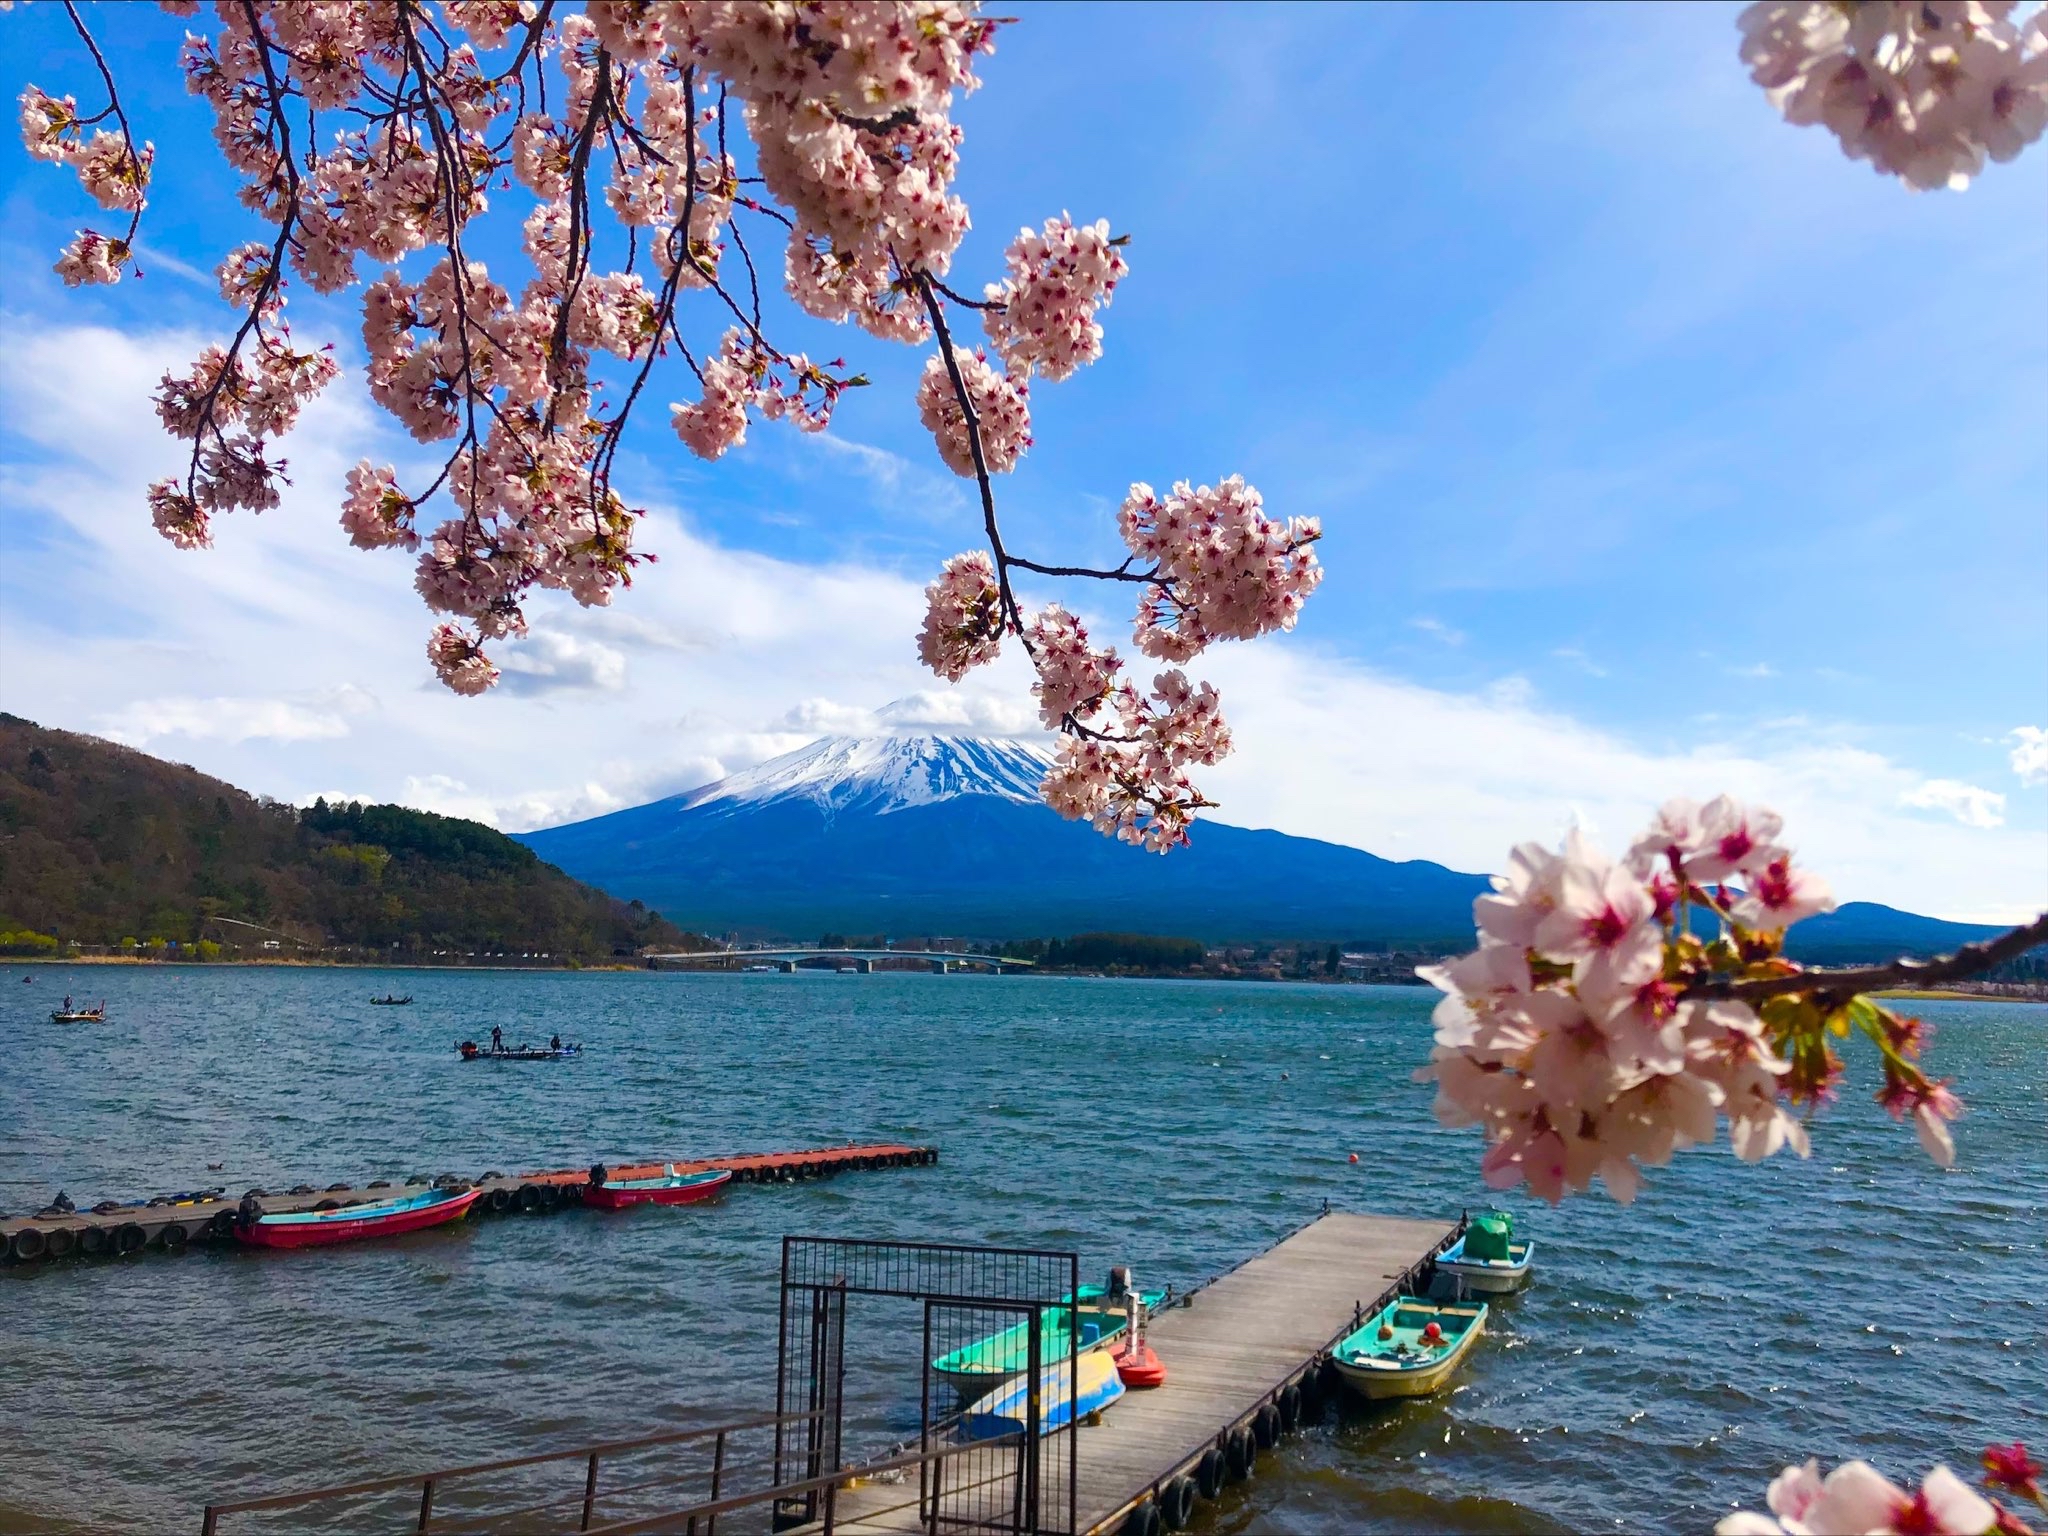 Lake Kawaguchi One Day Bus Tour with Craft Experience from Tokyo